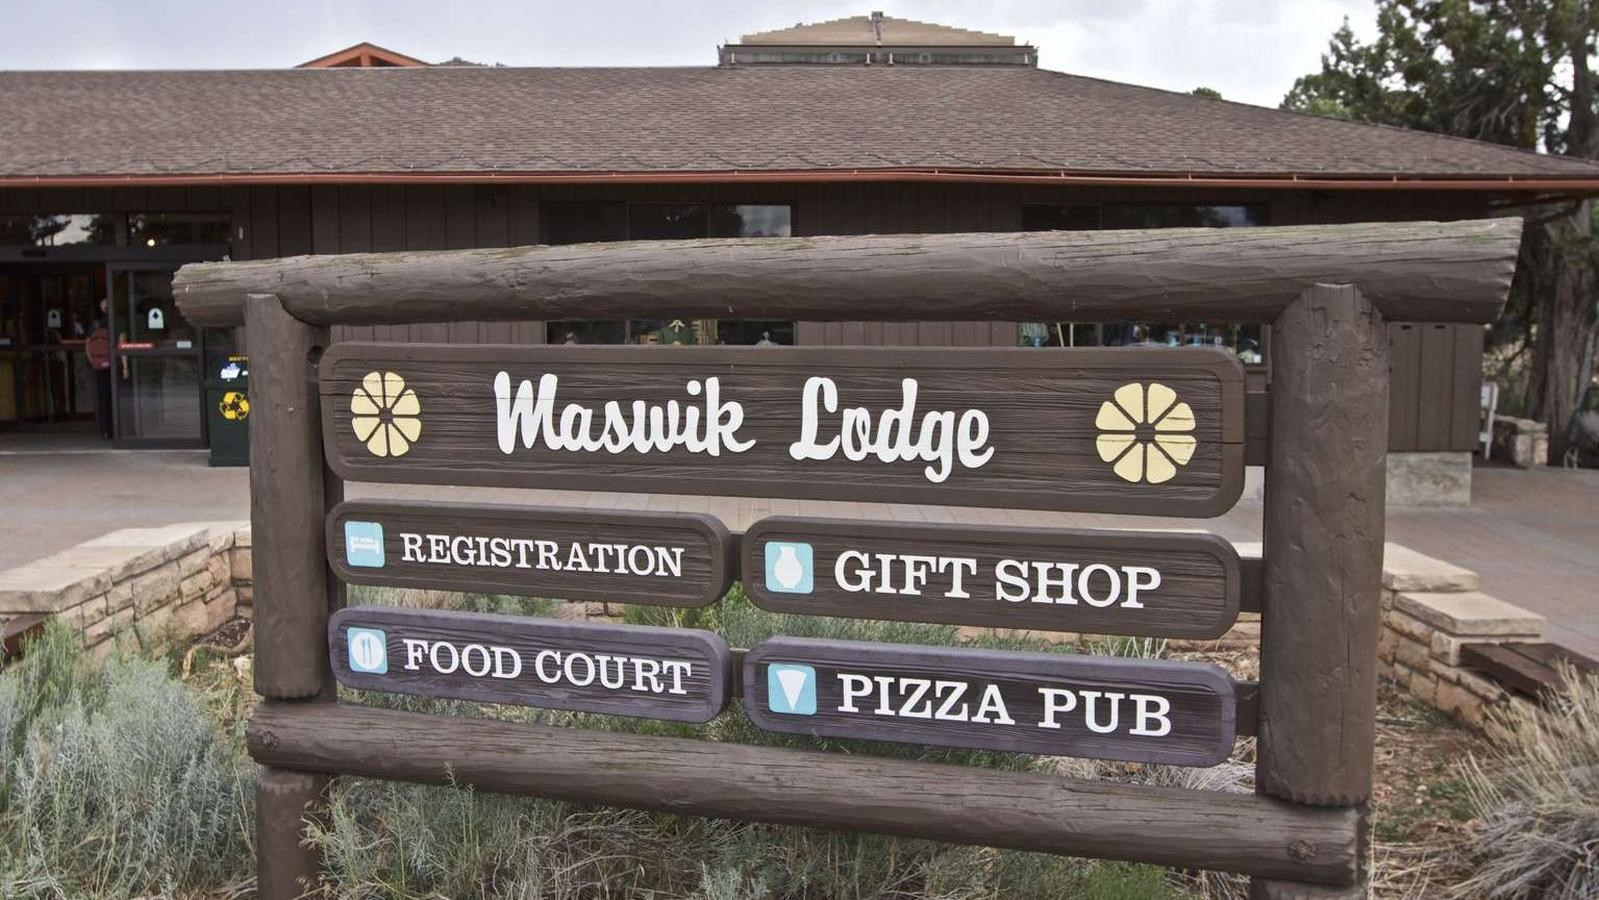 Wooden sign in front of single story lodge building reads Maswik Lodge, Registration, Gift Shop etc.